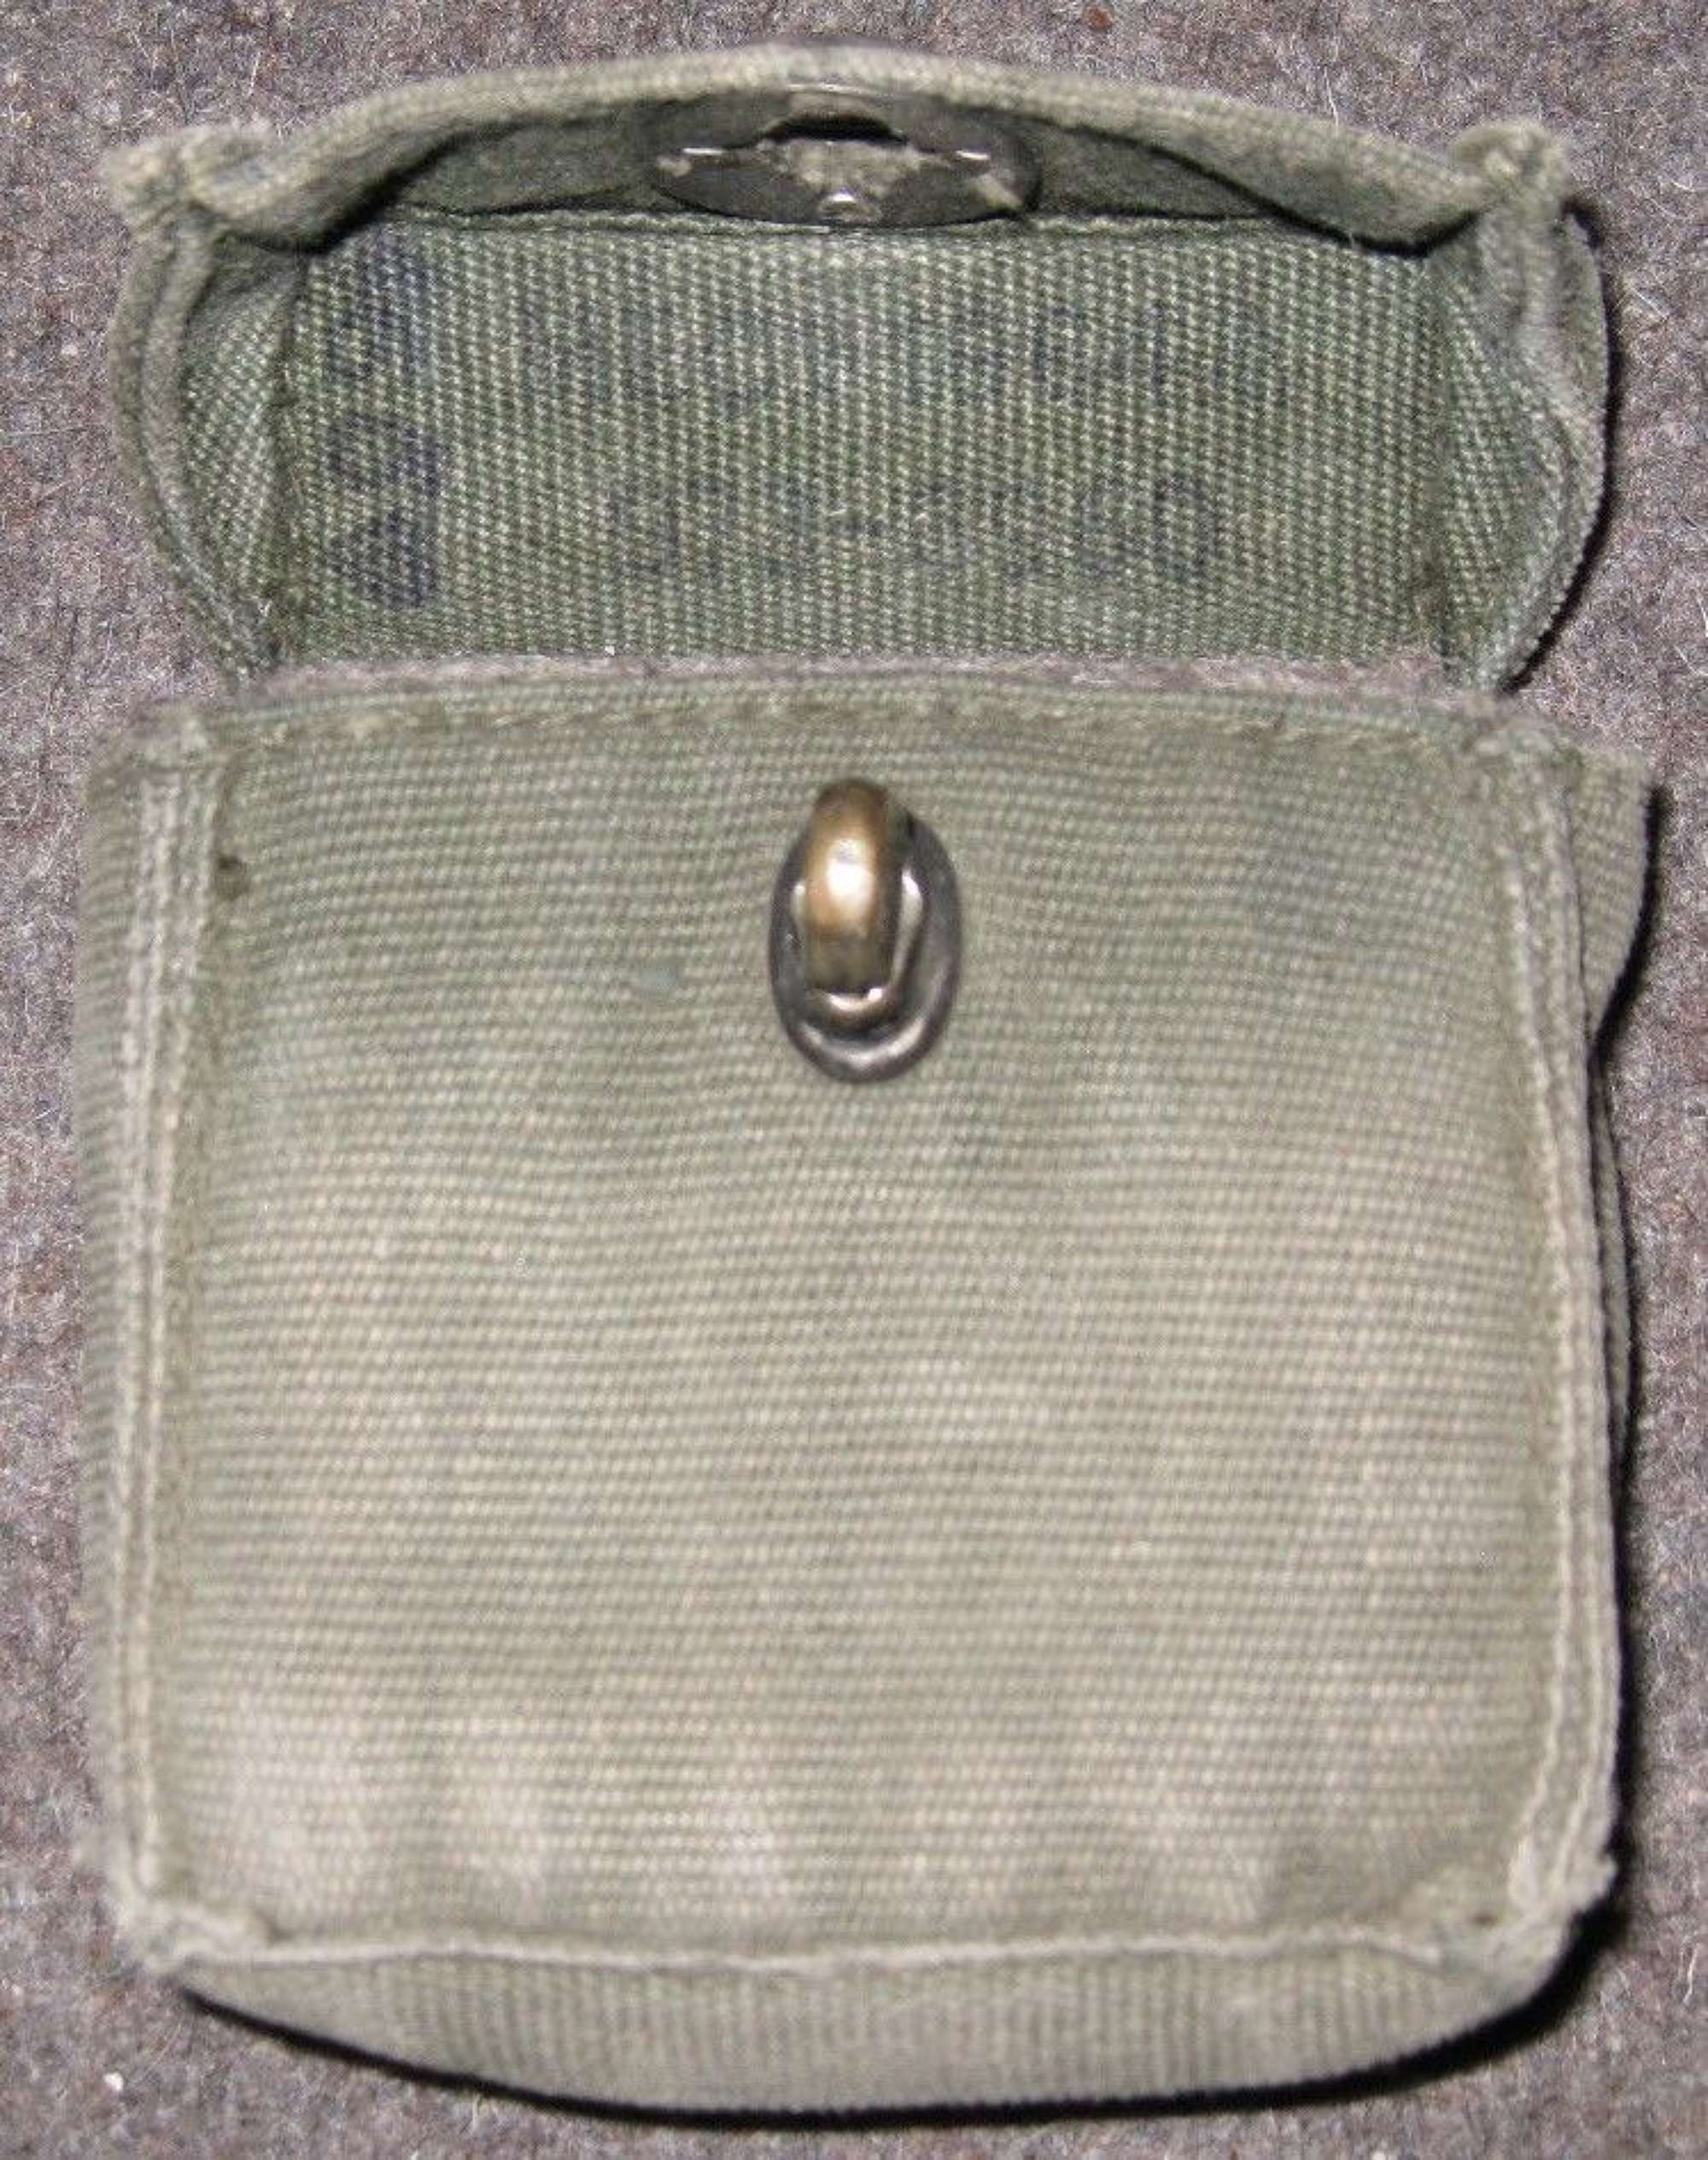 A 1964 DATED 58 PATTERN COMPASS POUCH